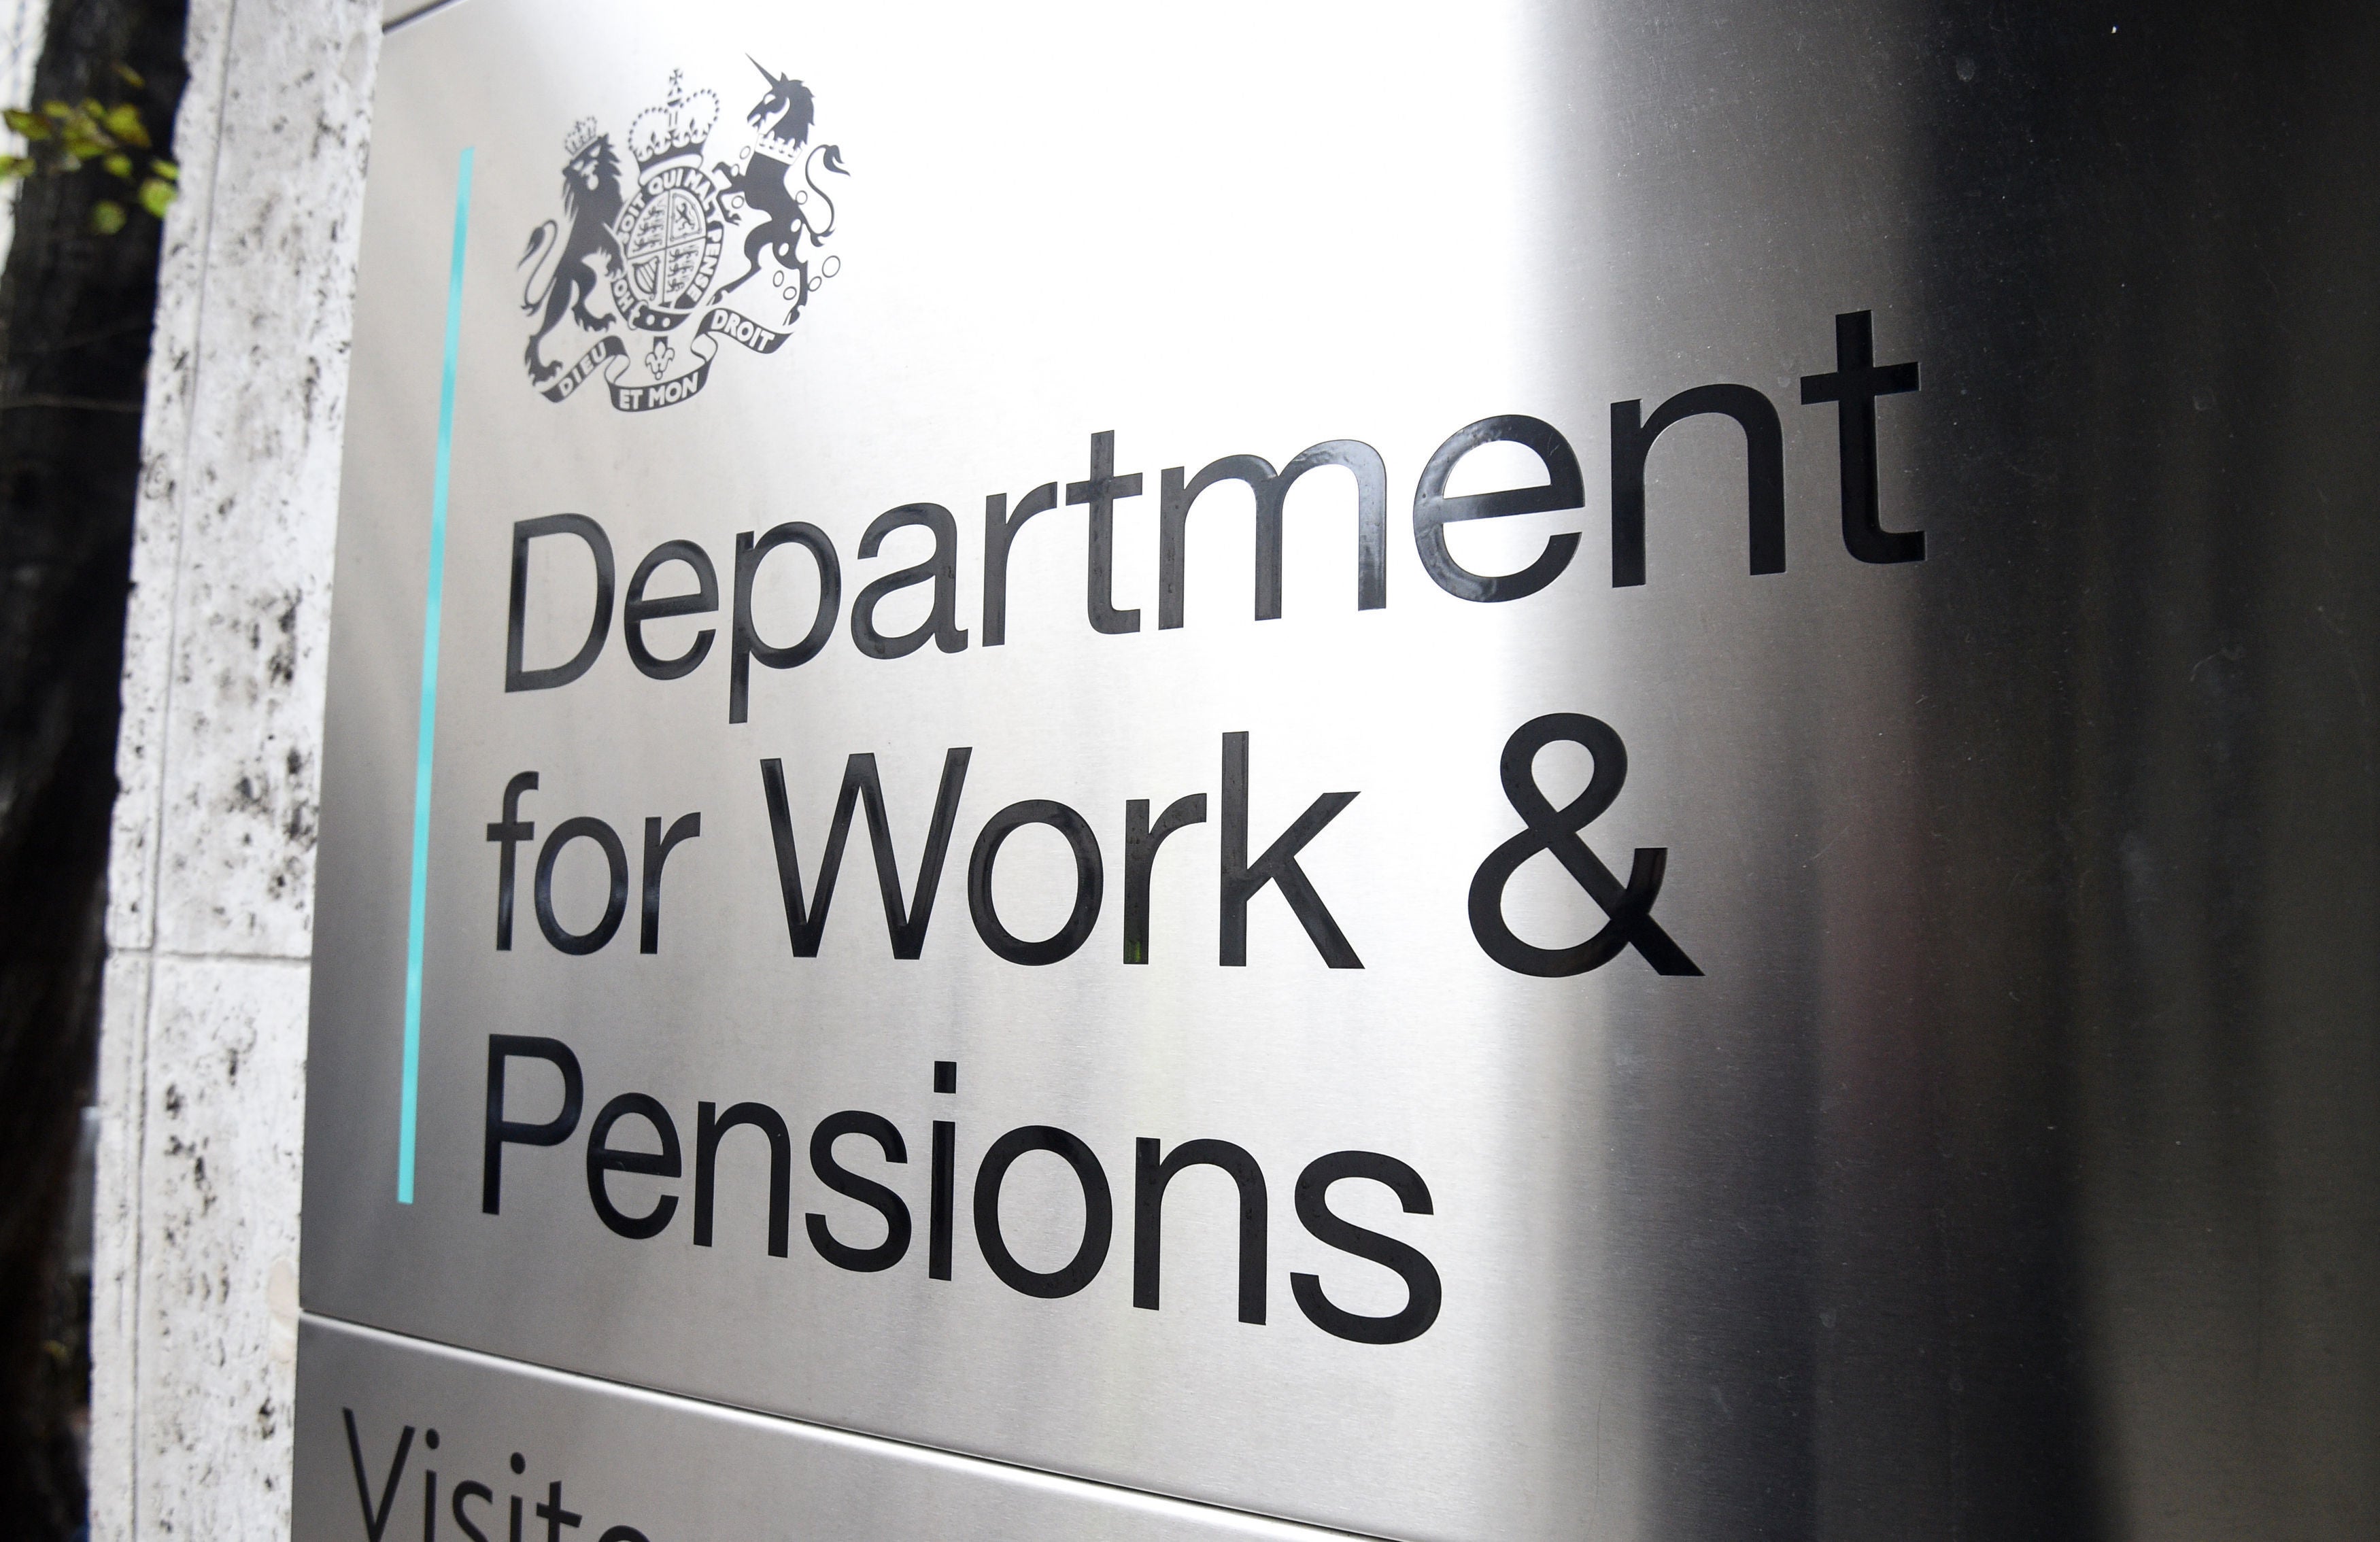 Decision times at Department for Work and Pensions have doubled since 2010, according to Labour analysis